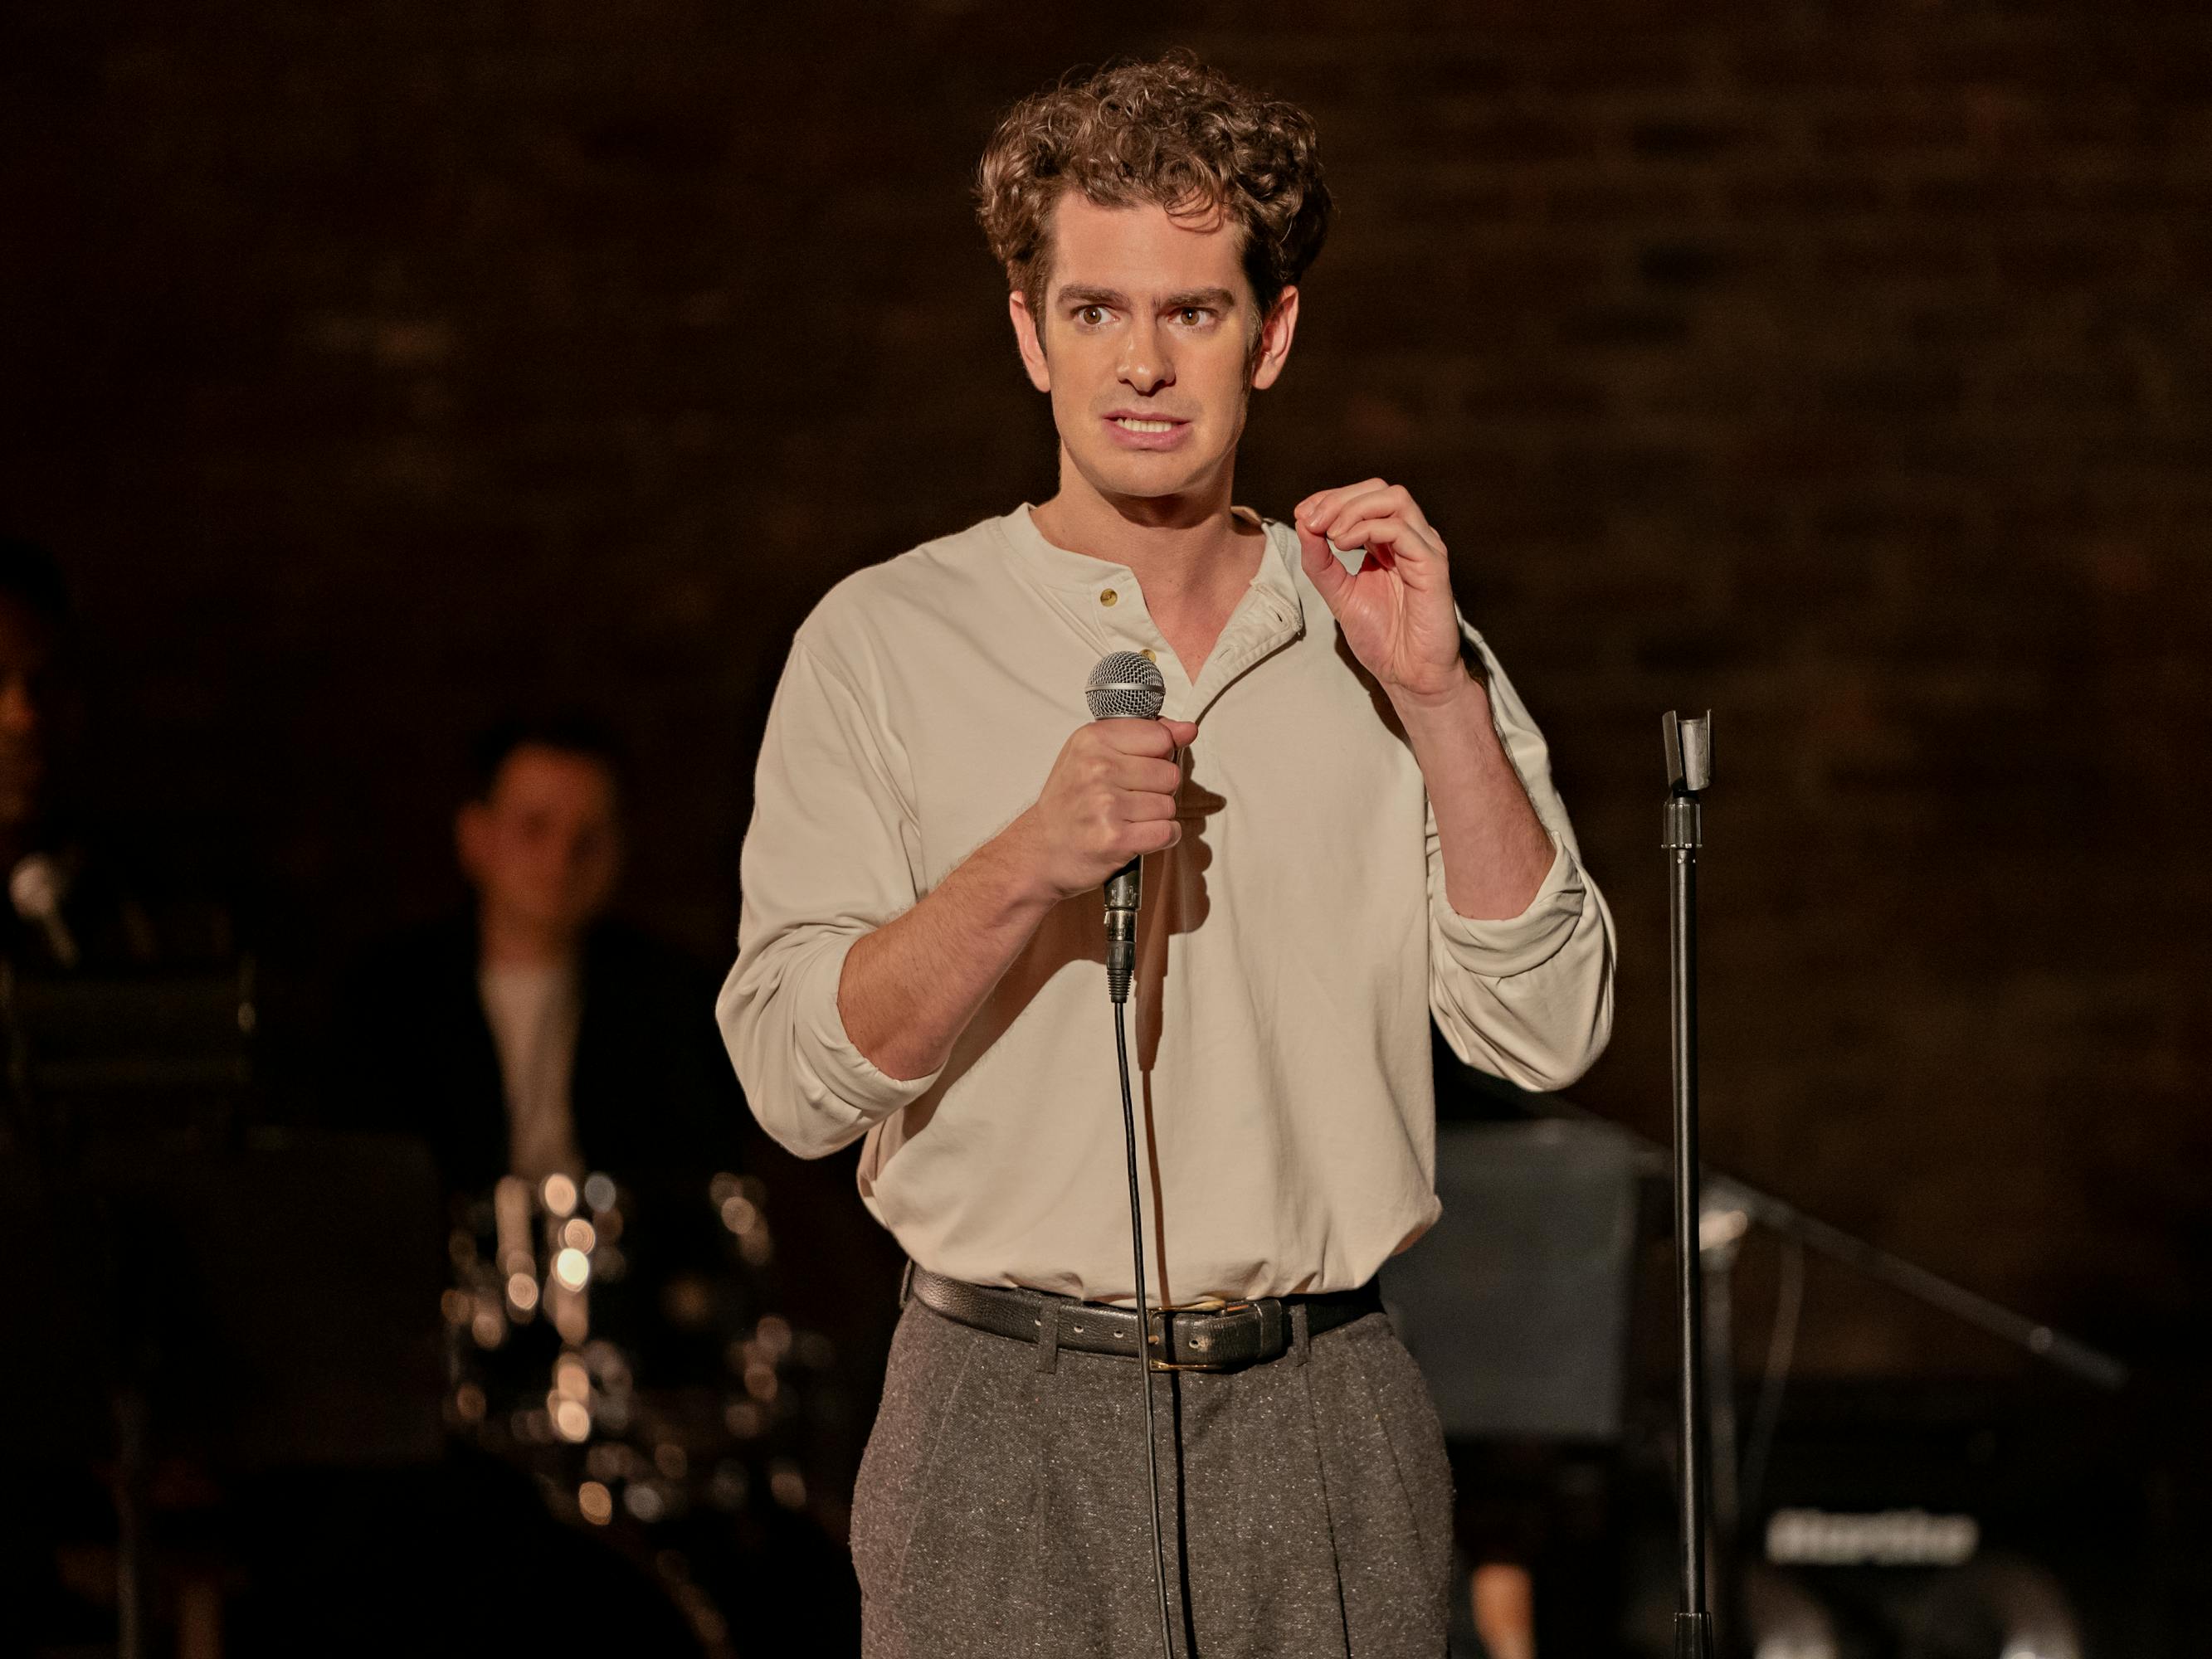 Andrew Garfield wears a white shirt and grey slacks and stands on a darkened stage holding a mic.